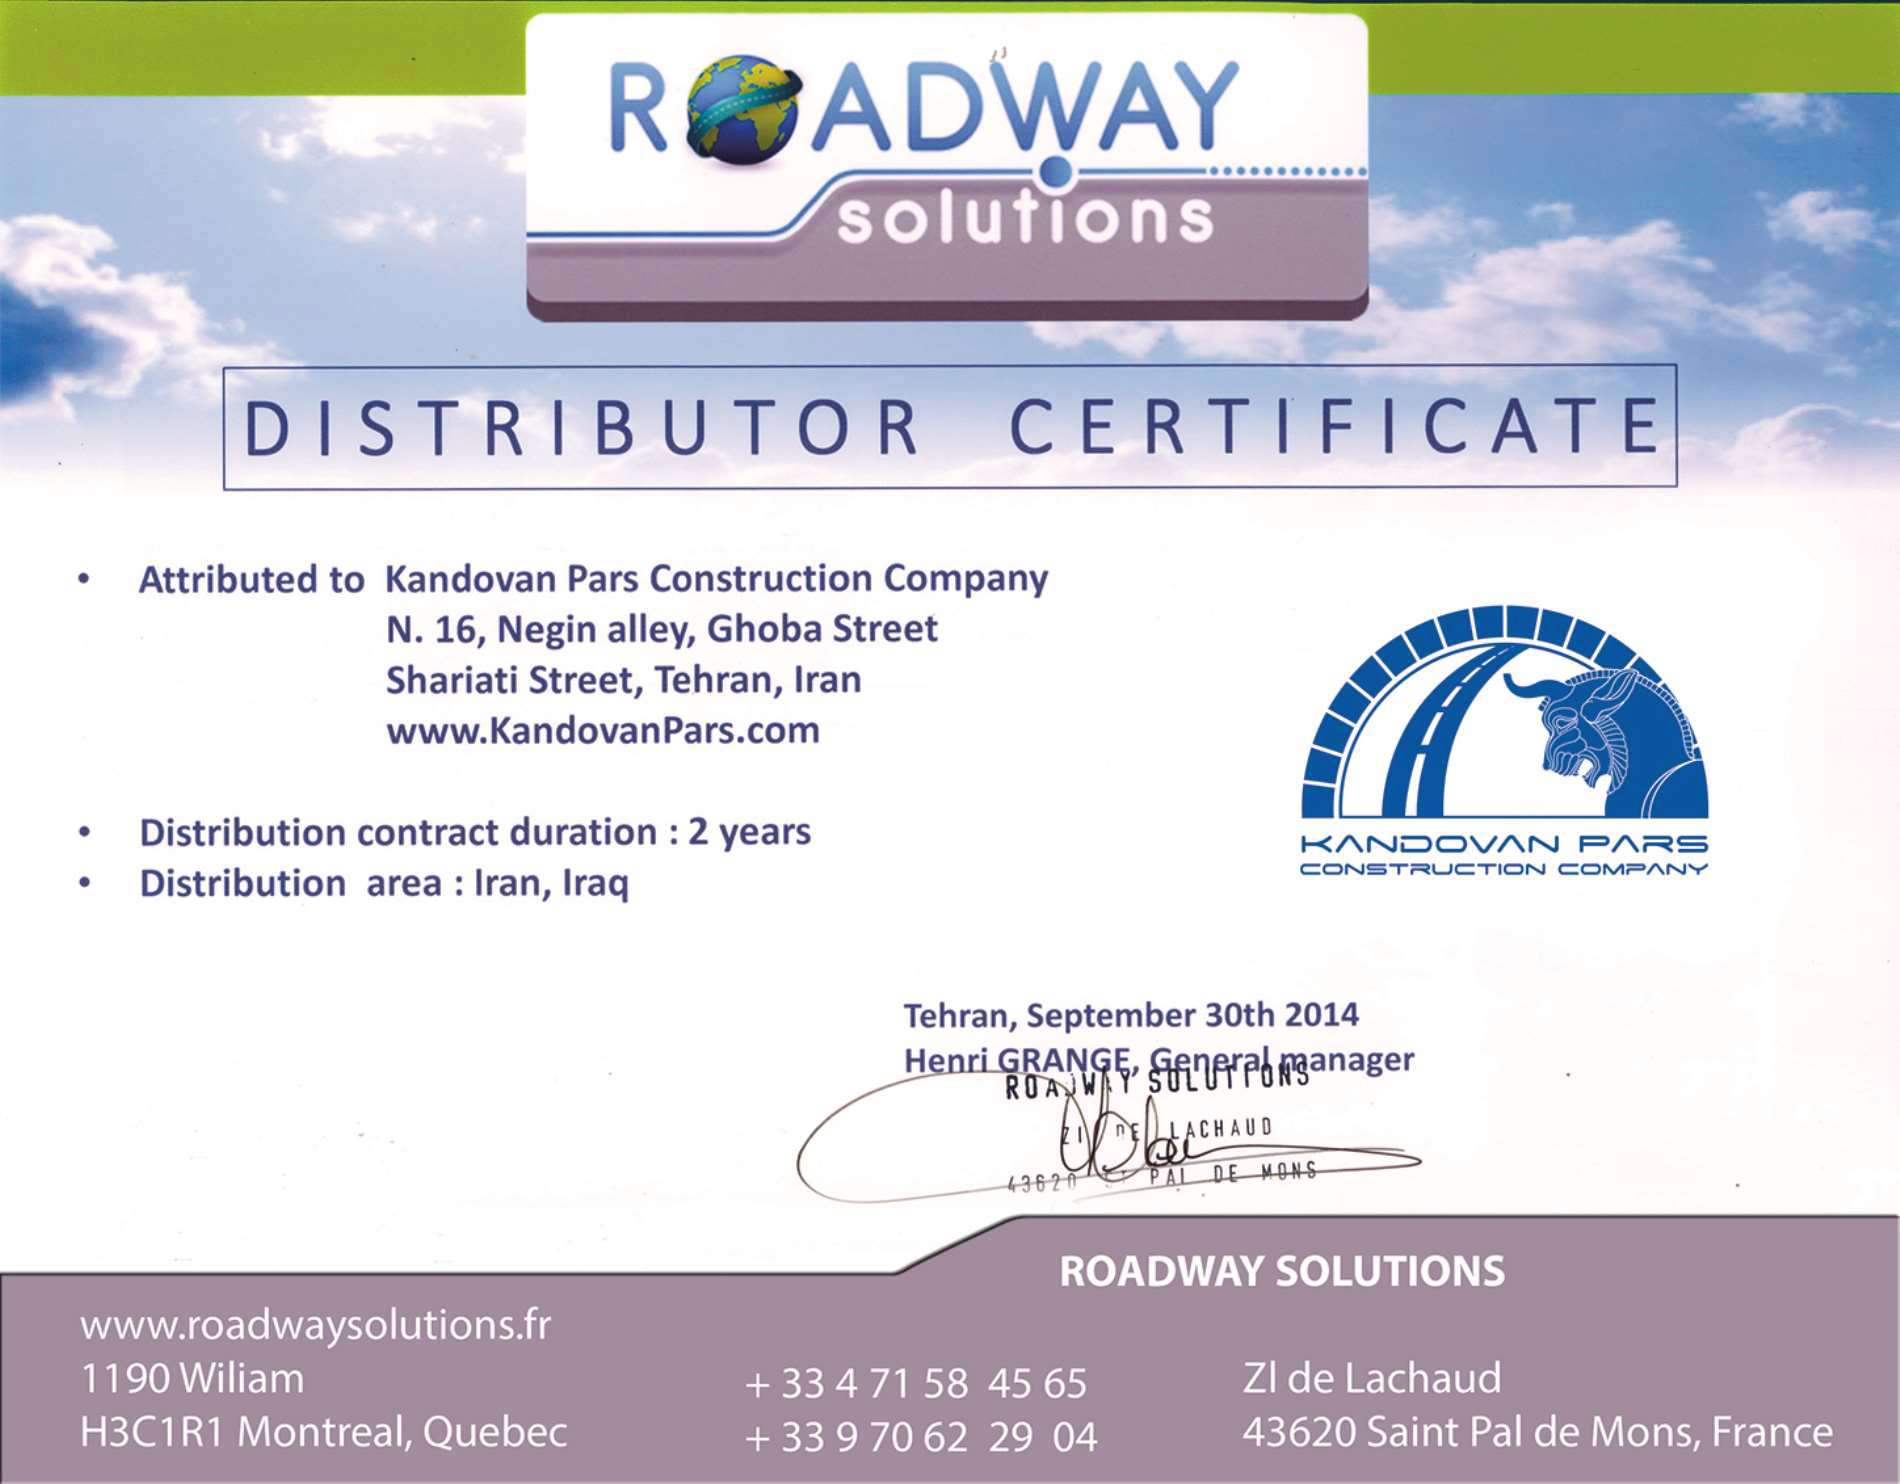 Exclusive distribution of Roadway Solution Co. of France